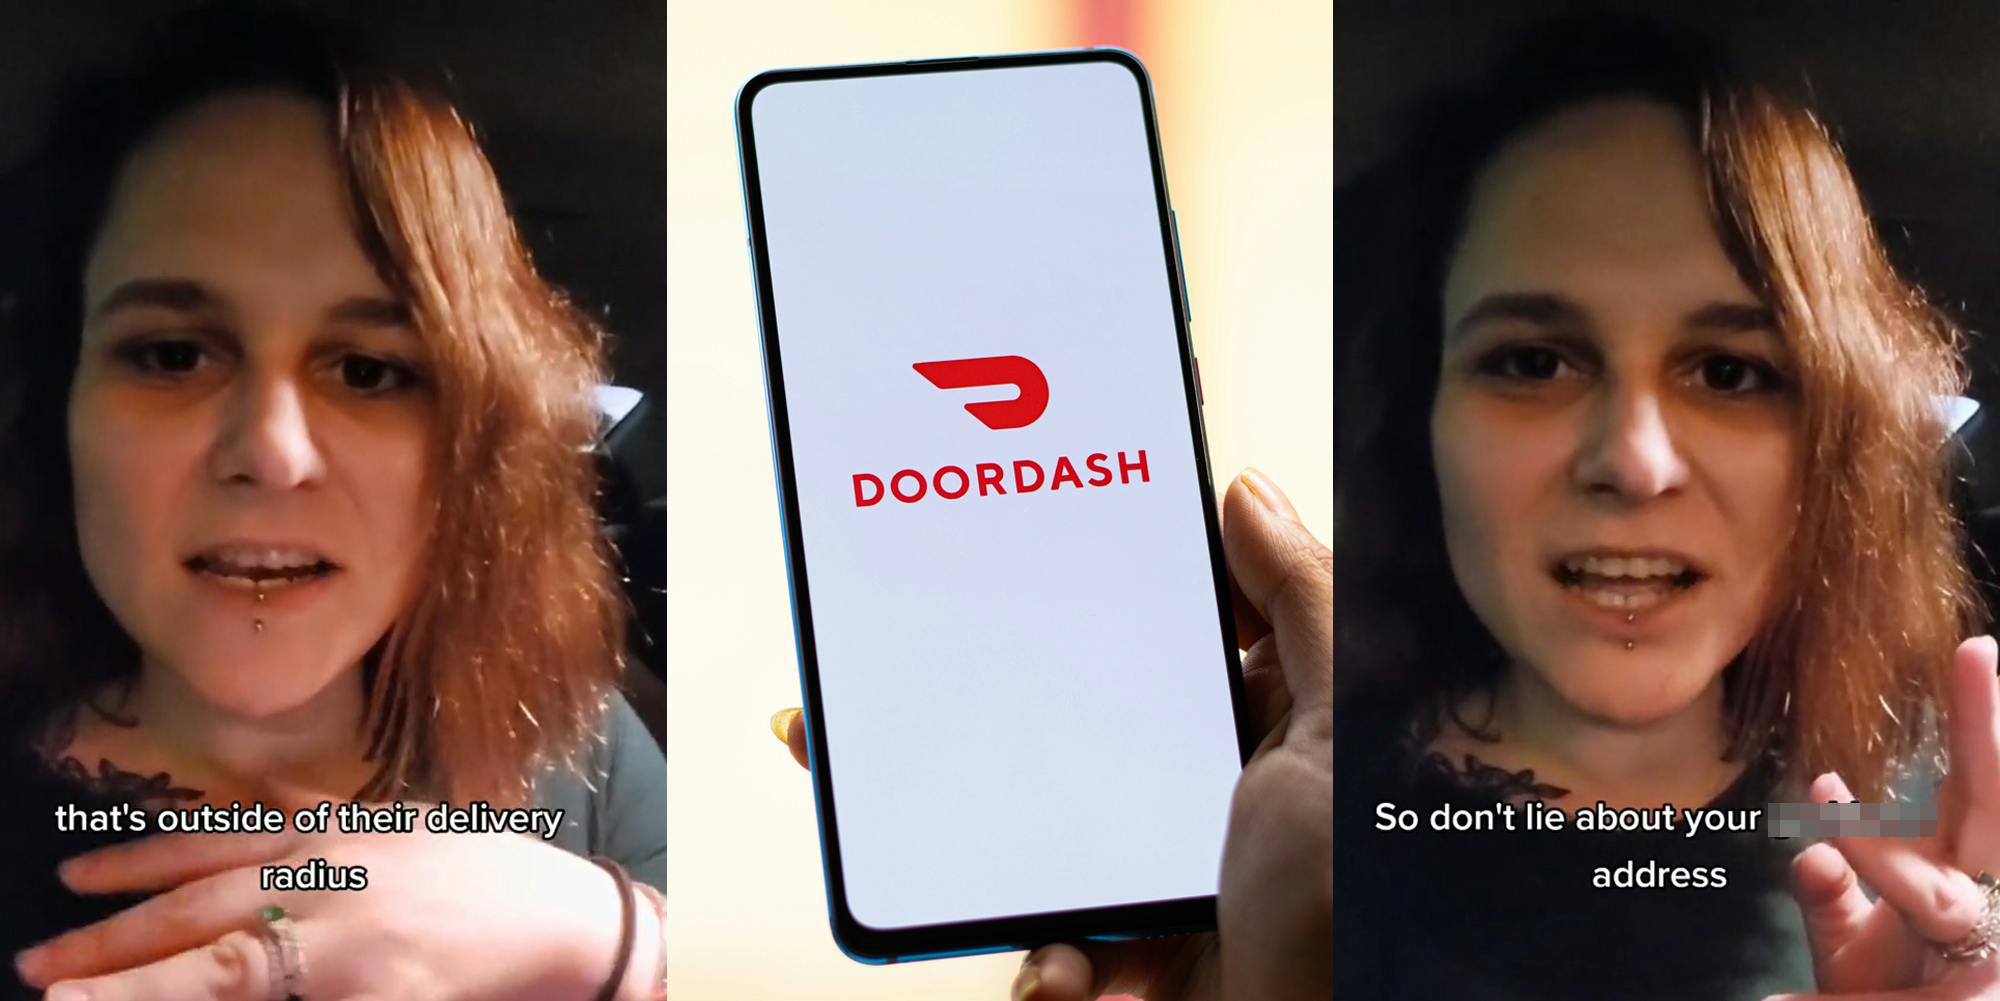 DoorDash driver speaking in car with caption "that's outside of their delivery radius" (l) DoorDash on phone in hand in front of blurred tan background (c) DoorDash driver speaking in car with caption "So don't lie about your blank address" (r)